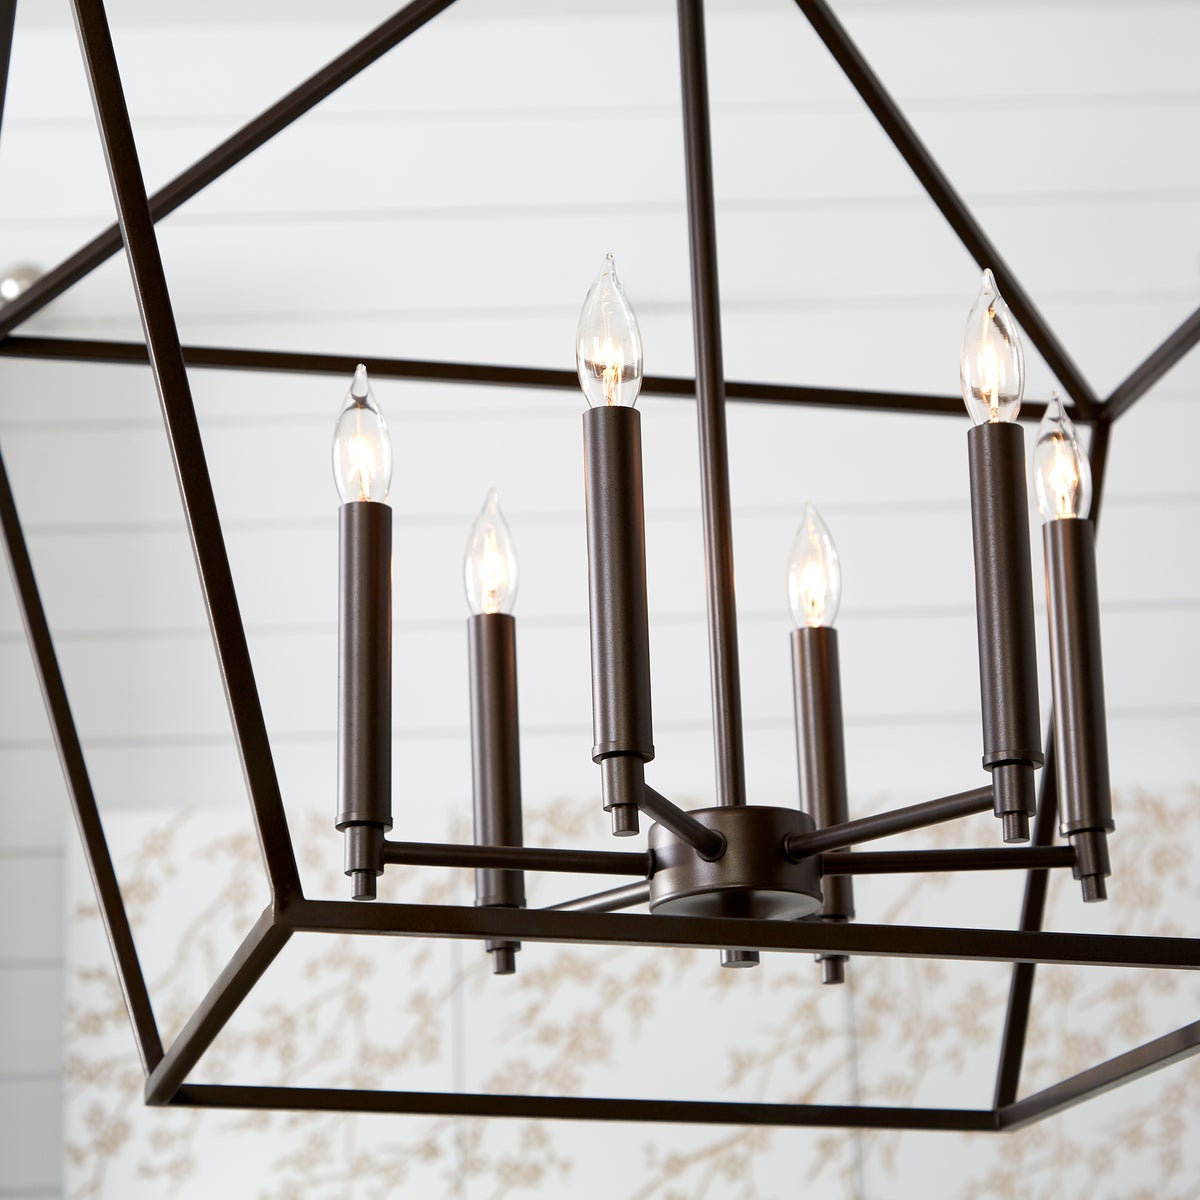 Farmhouse Pendant Light with candelabra bulbs, open tapered shade, and ample illumination. Perfect for foyer, hallway, or kitchen. Fits distressed natural woods and whitewashed floors.